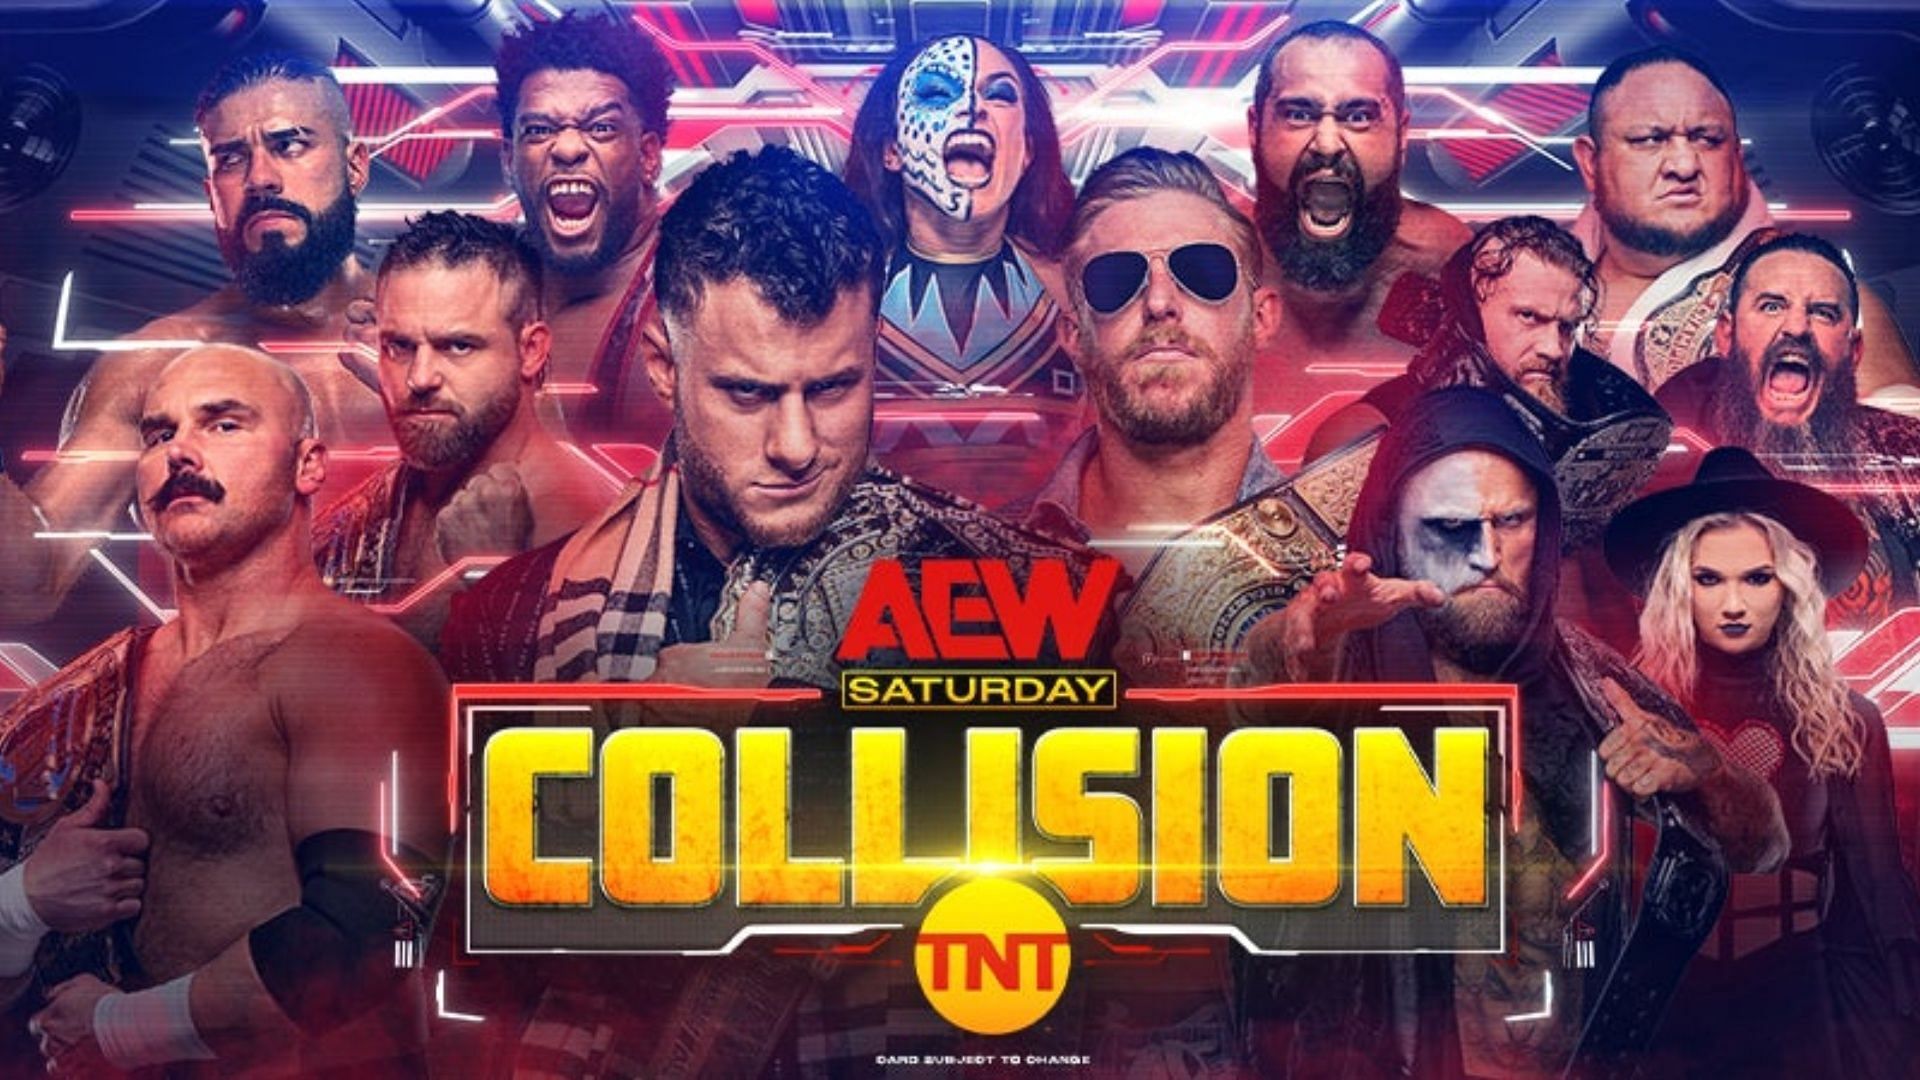 A graphic for the upcoming AEW Collision show.